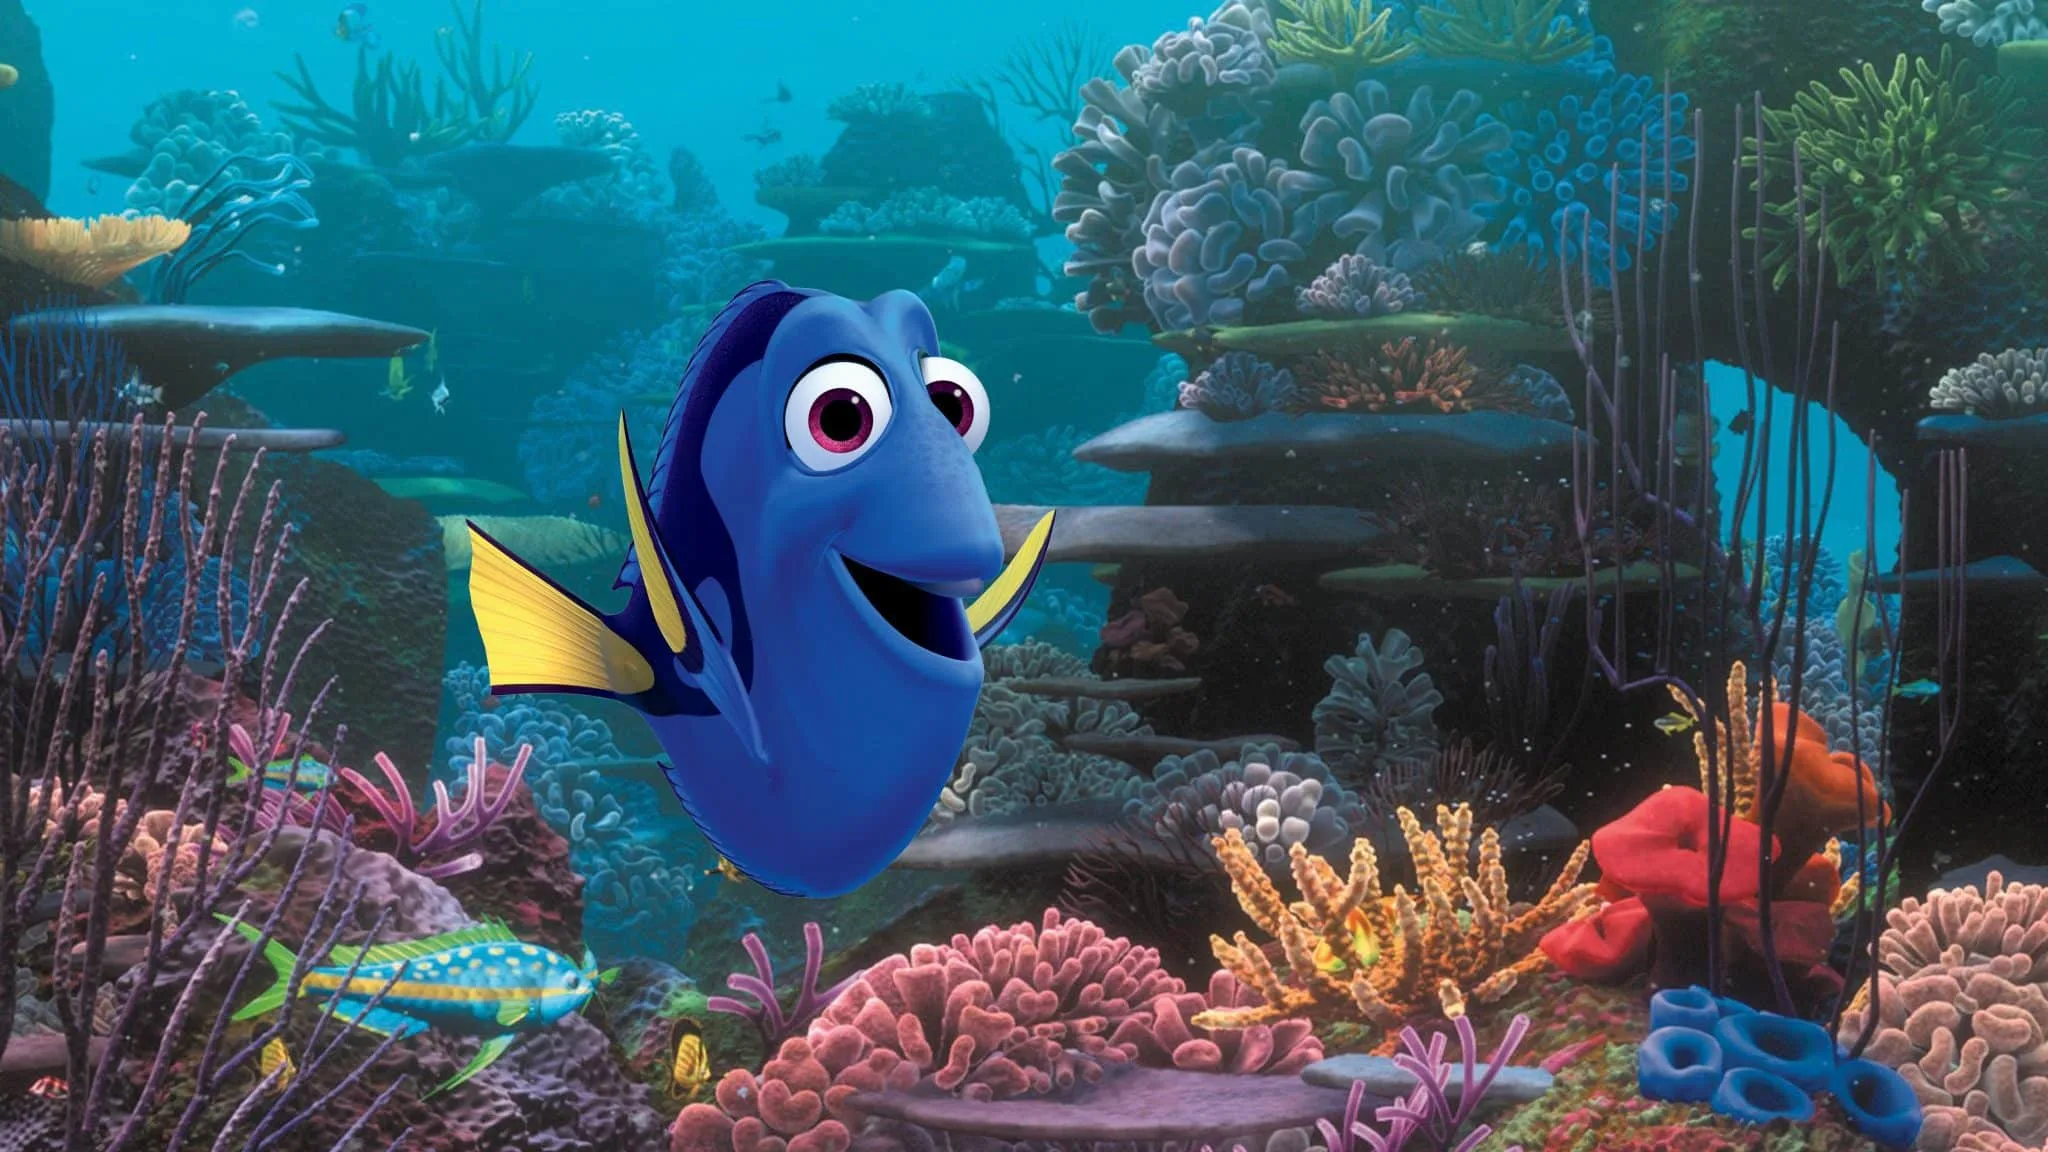 Finding Dory in Theaters #HaveYouSeenHer ~ ThisNThatwithOlivia.com